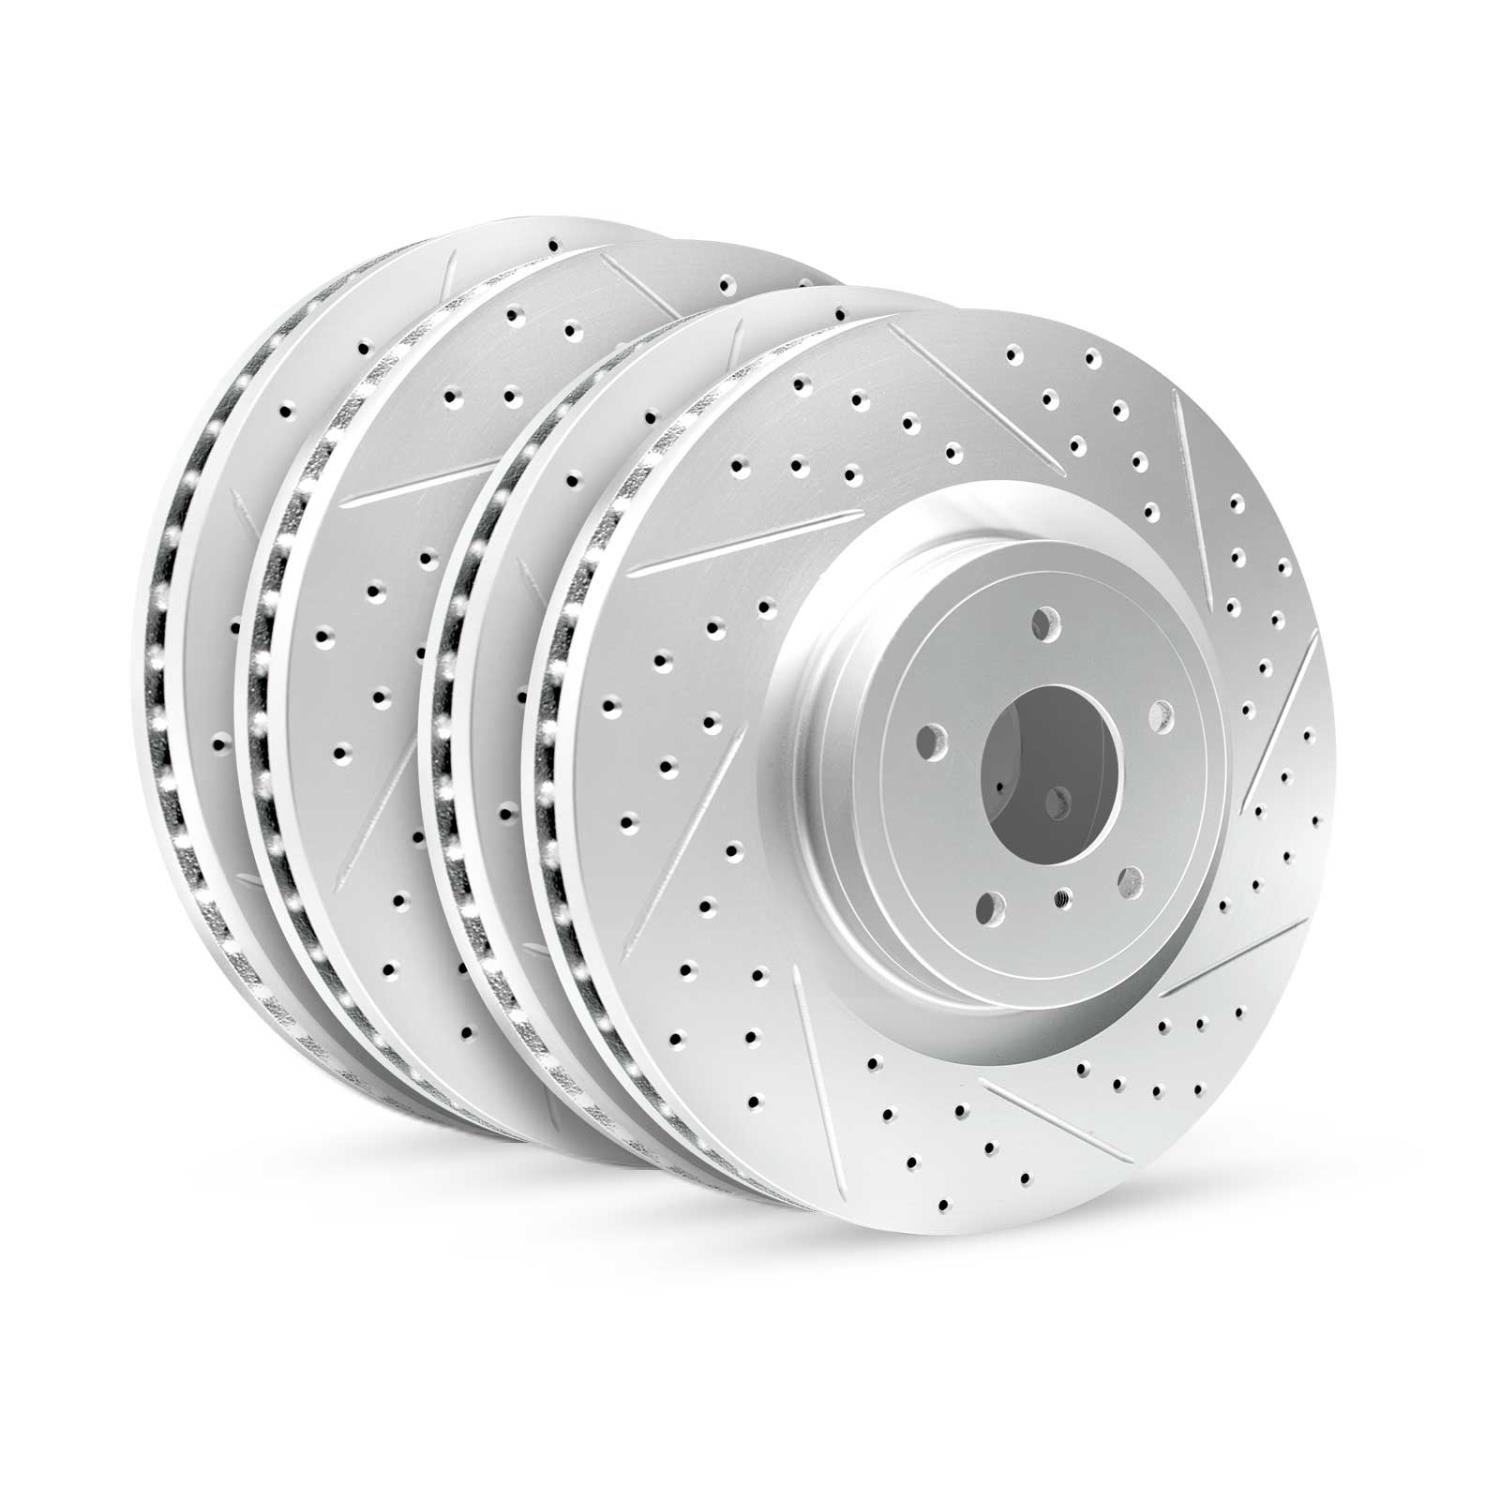 GEO-Carbon Drilled/Slotted Rotors, 2004-2012 Mitsubishi, Position: Front/Rear